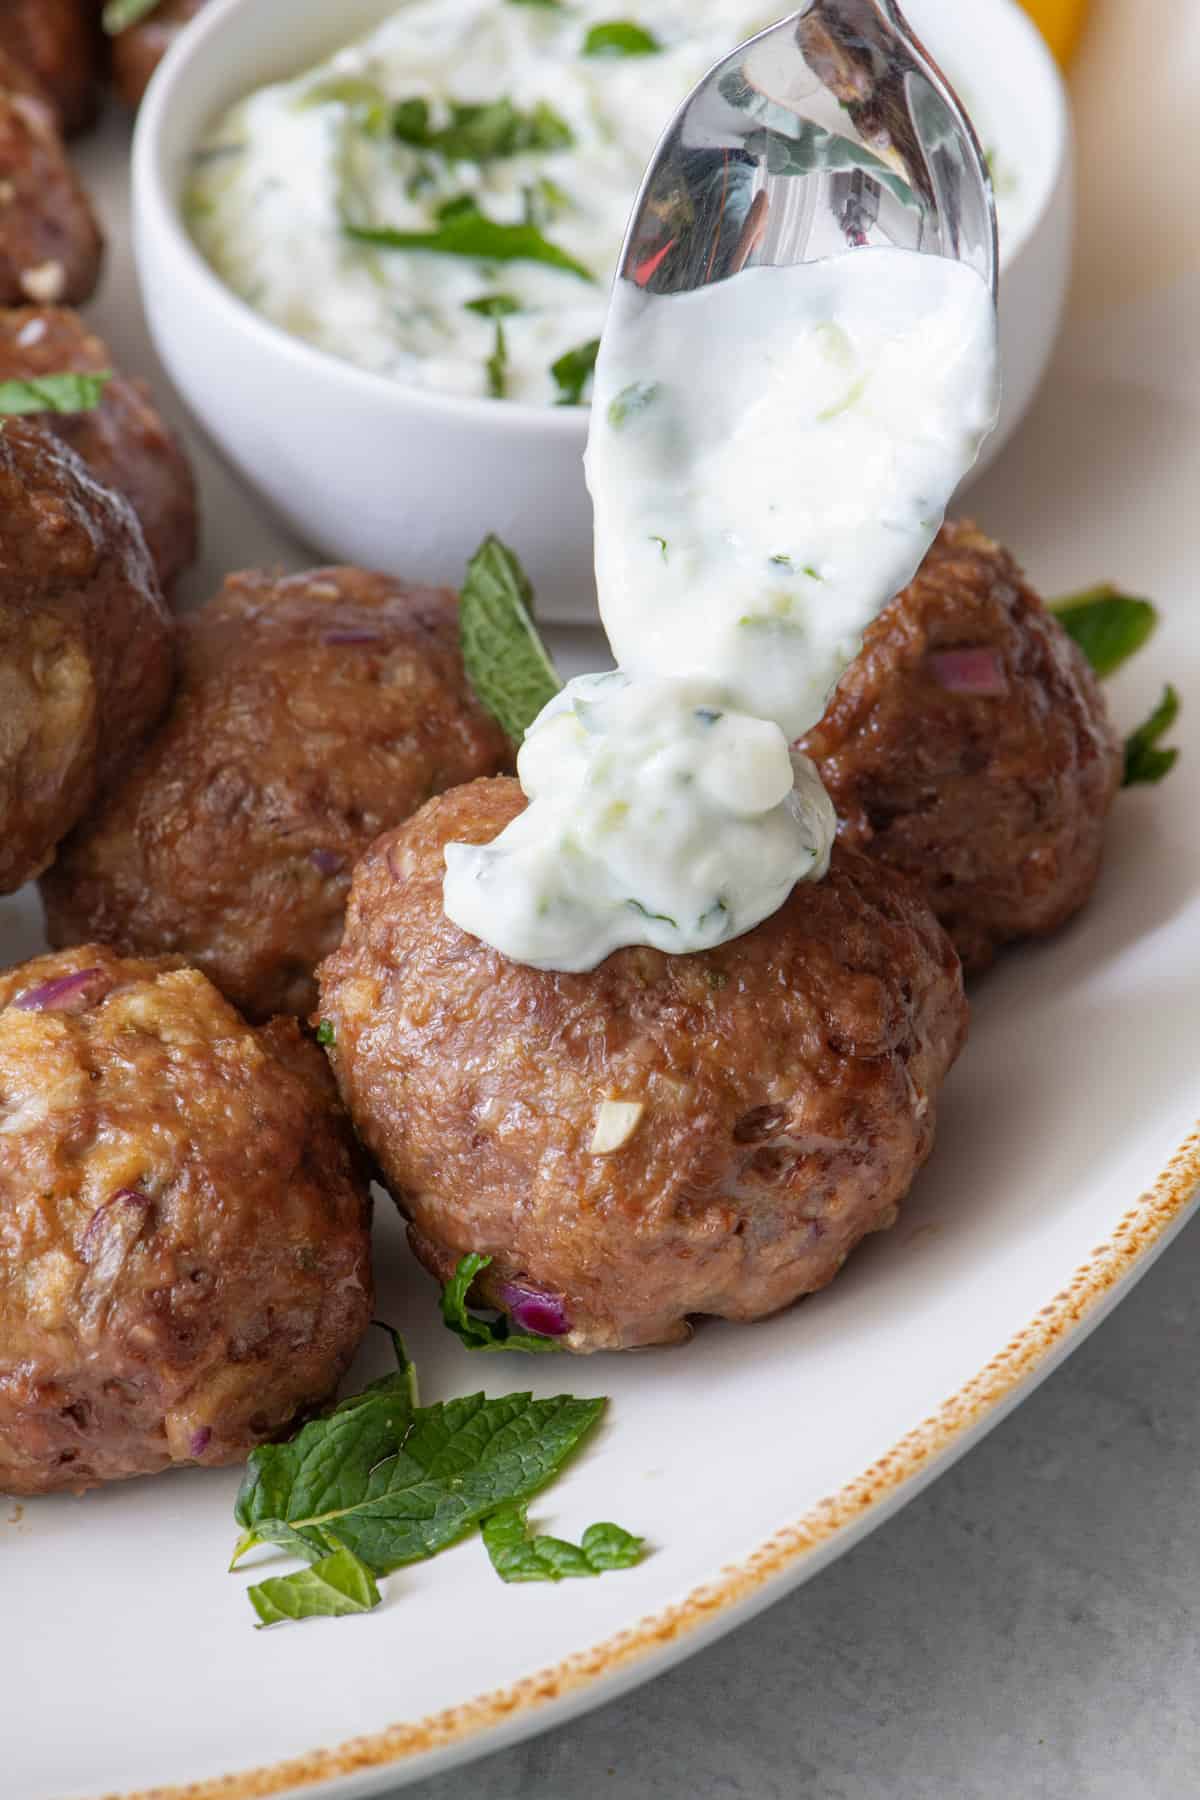 Spoon dropping tzatzki over a single meatball on a platter with more meatballs.